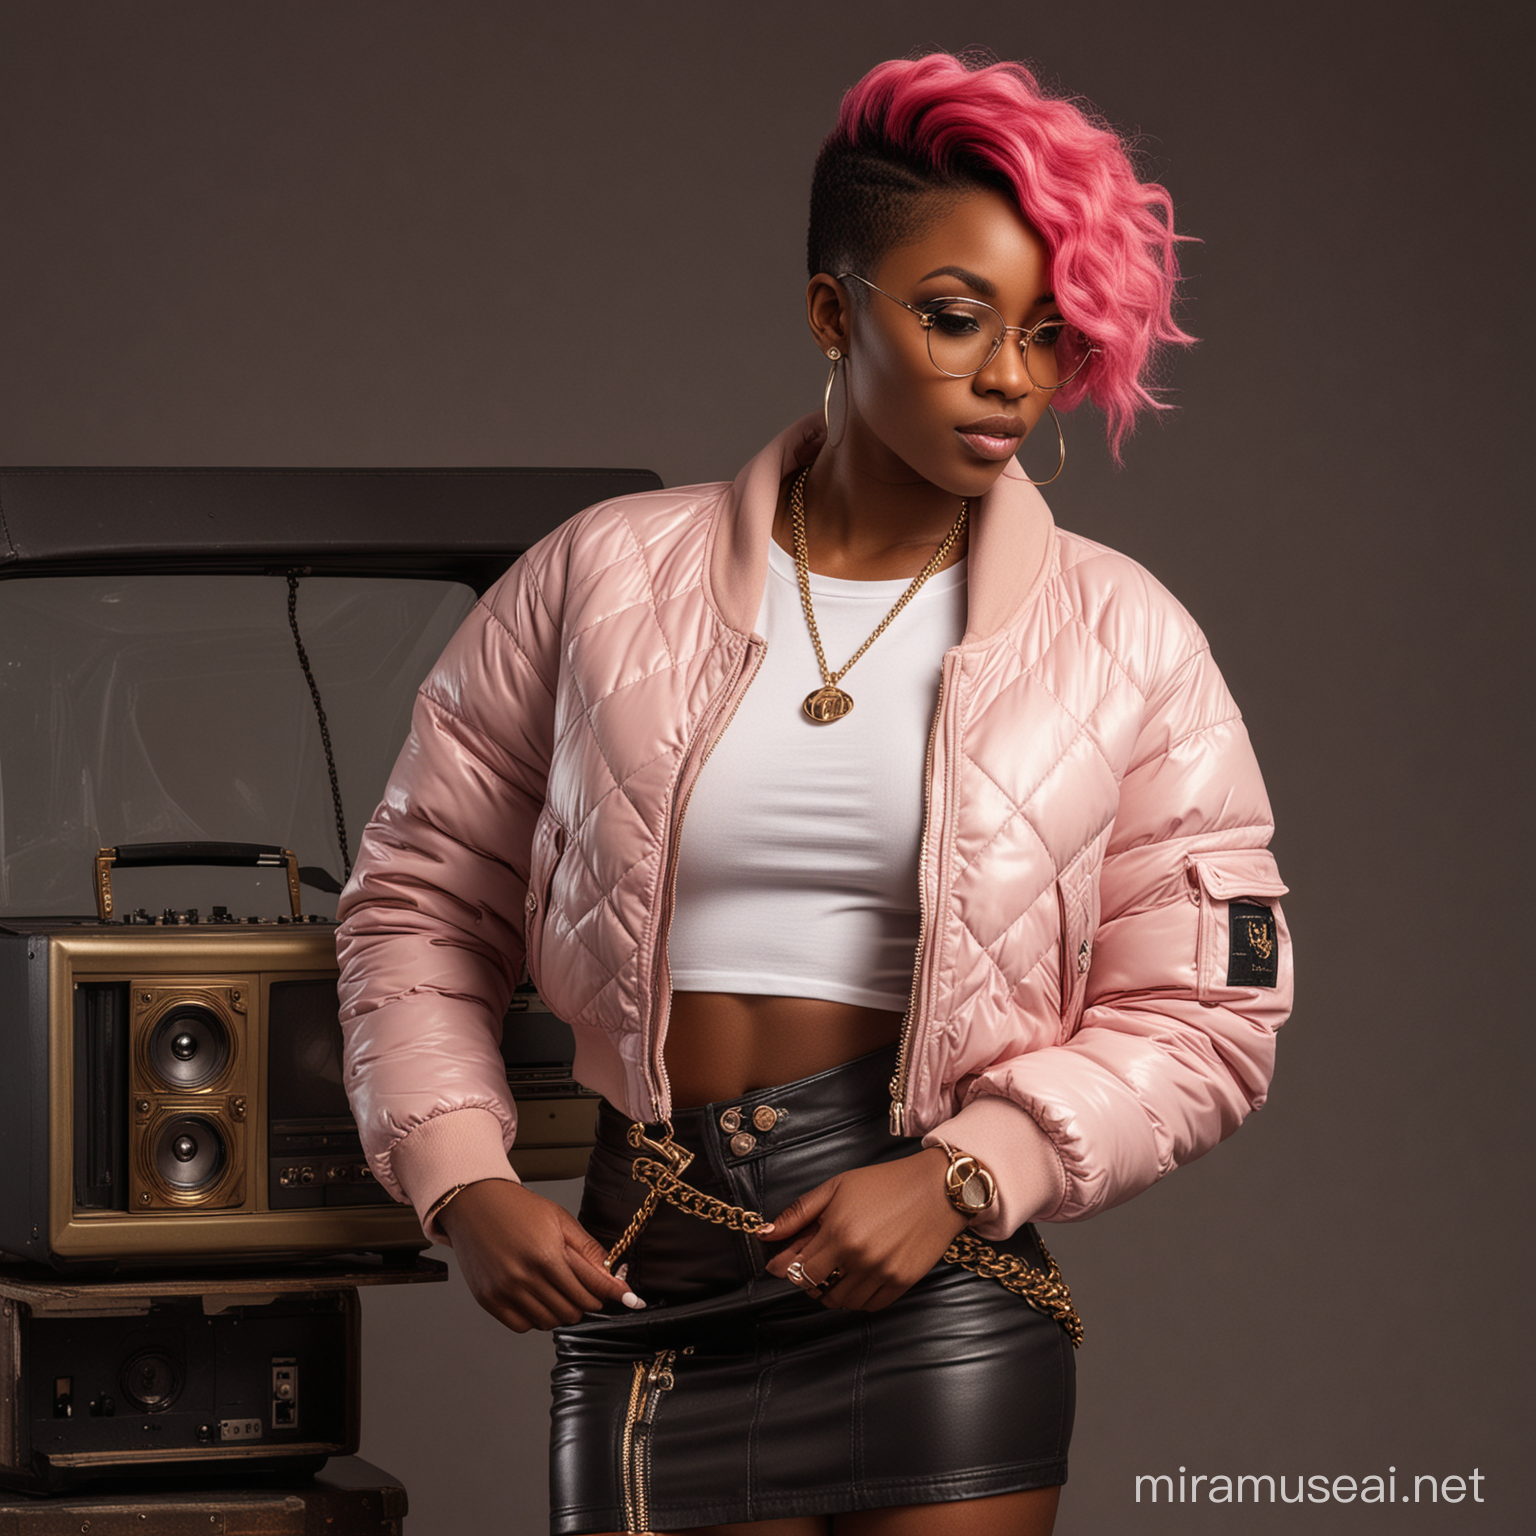 Seductive African Female DJ in Dark Pink Hairstyle and Military Glasses with Vintage Television